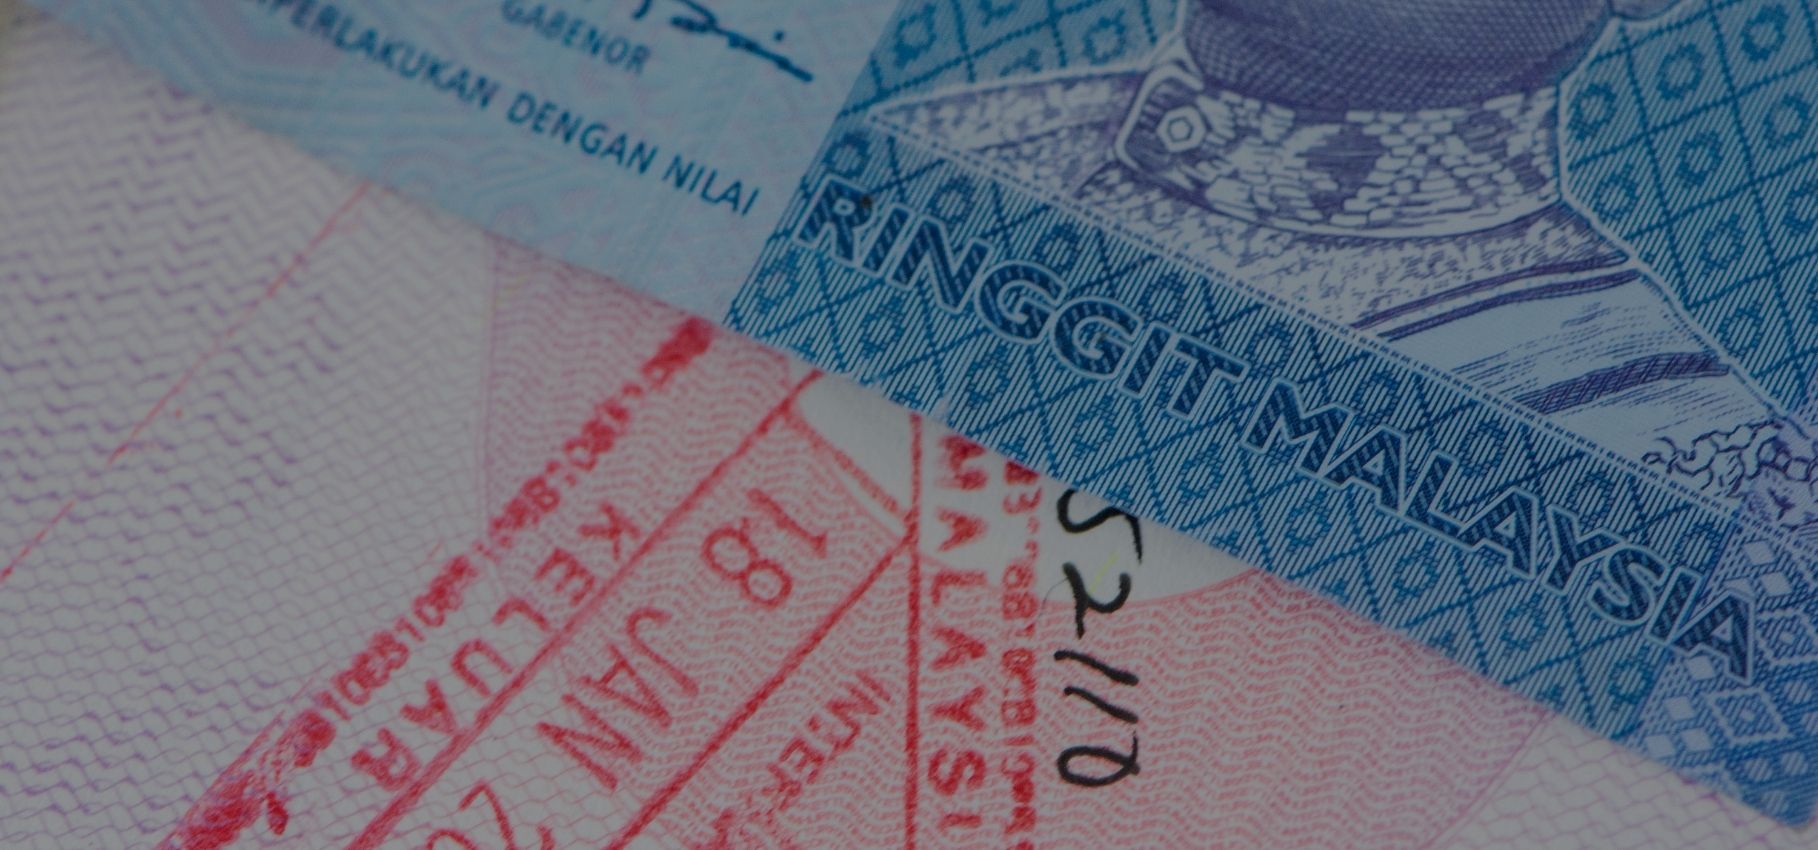 How to get Malaysia tourist visa for Indians